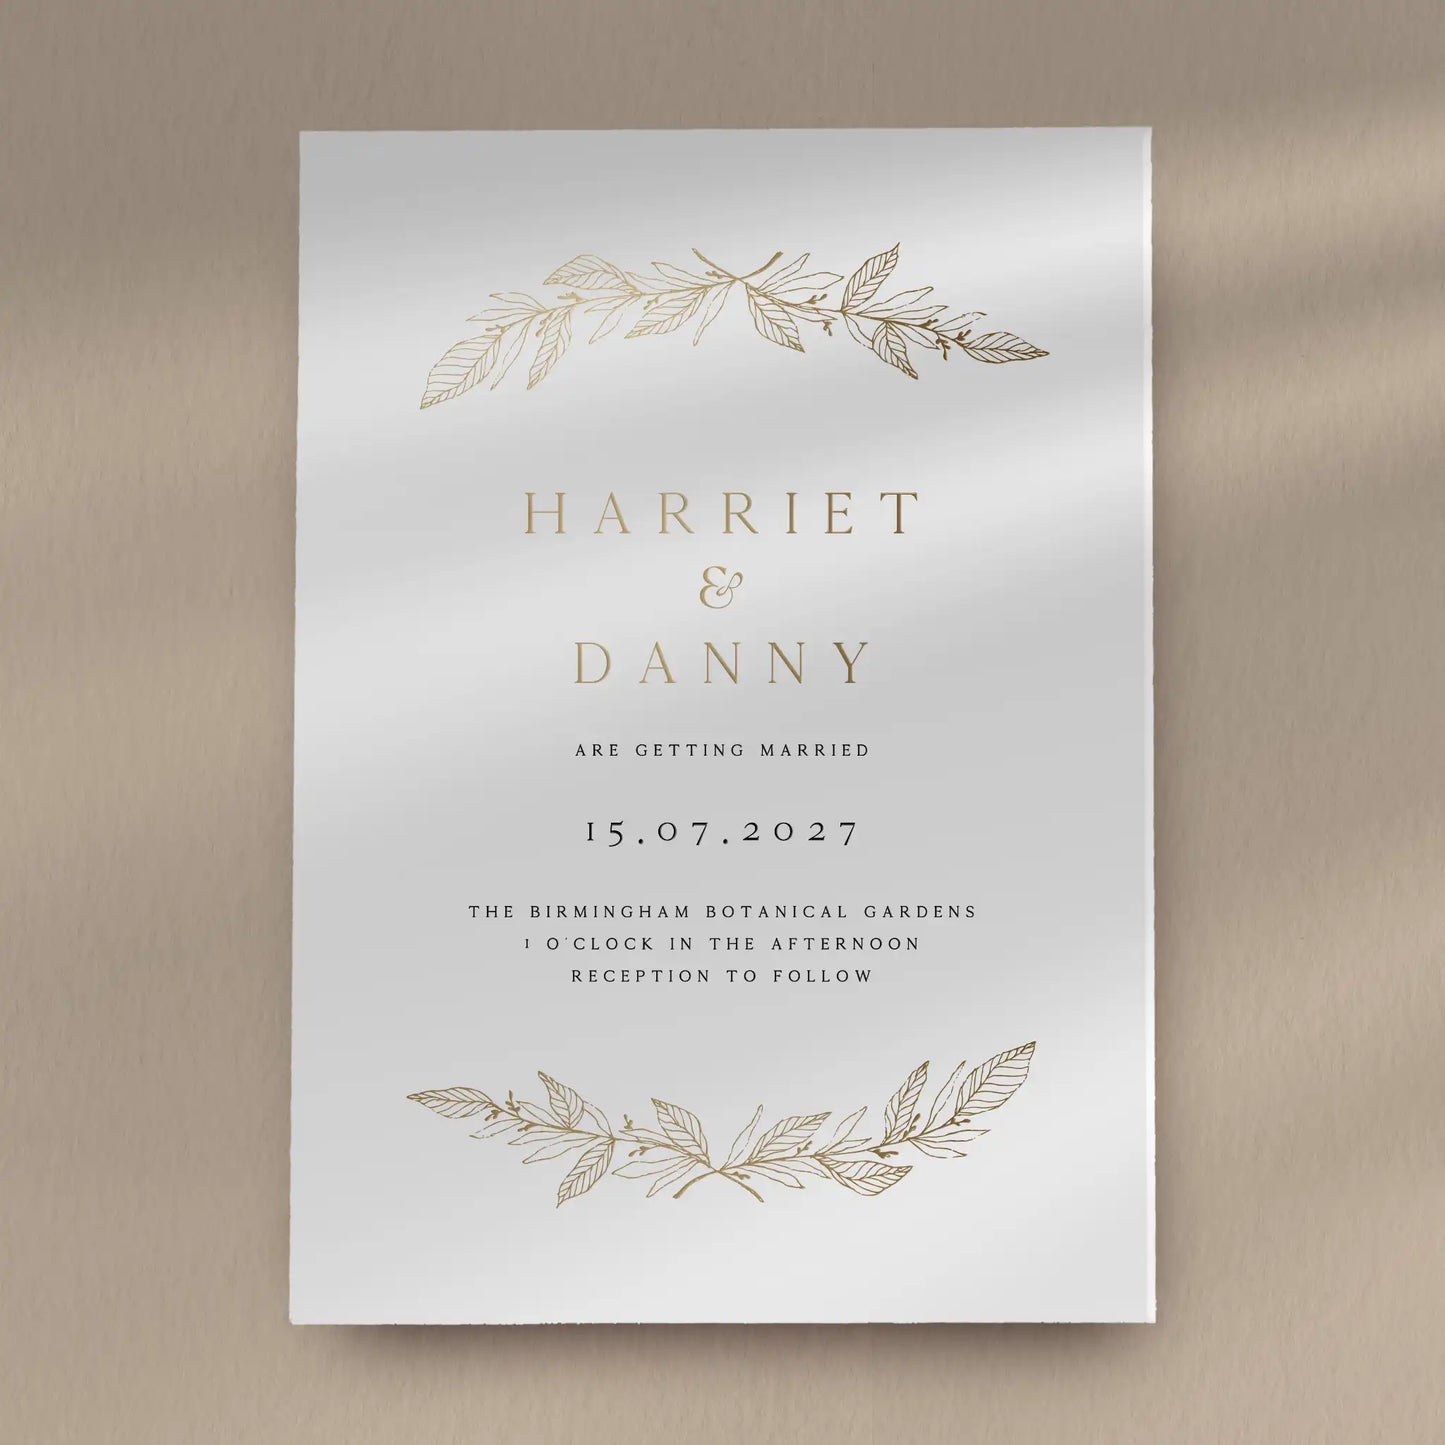 Day Invitation Sample  Ivy and Gold Wedding Stationery Harriet  